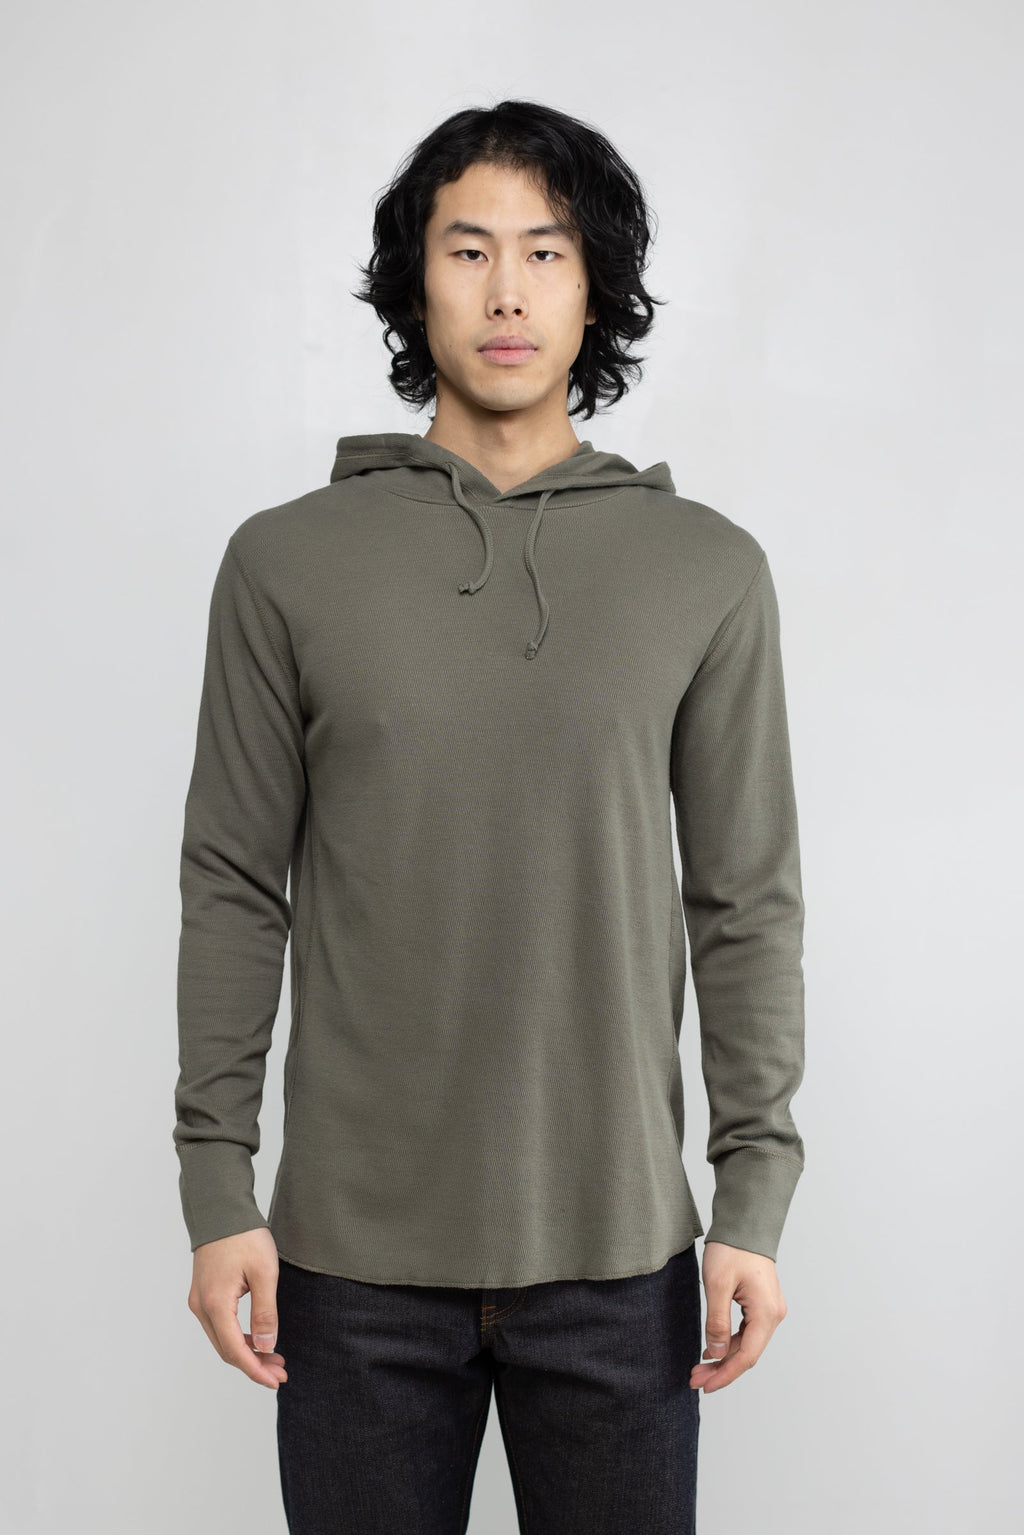 Mesh Thermal Pullover Hoodie in Army Green 02